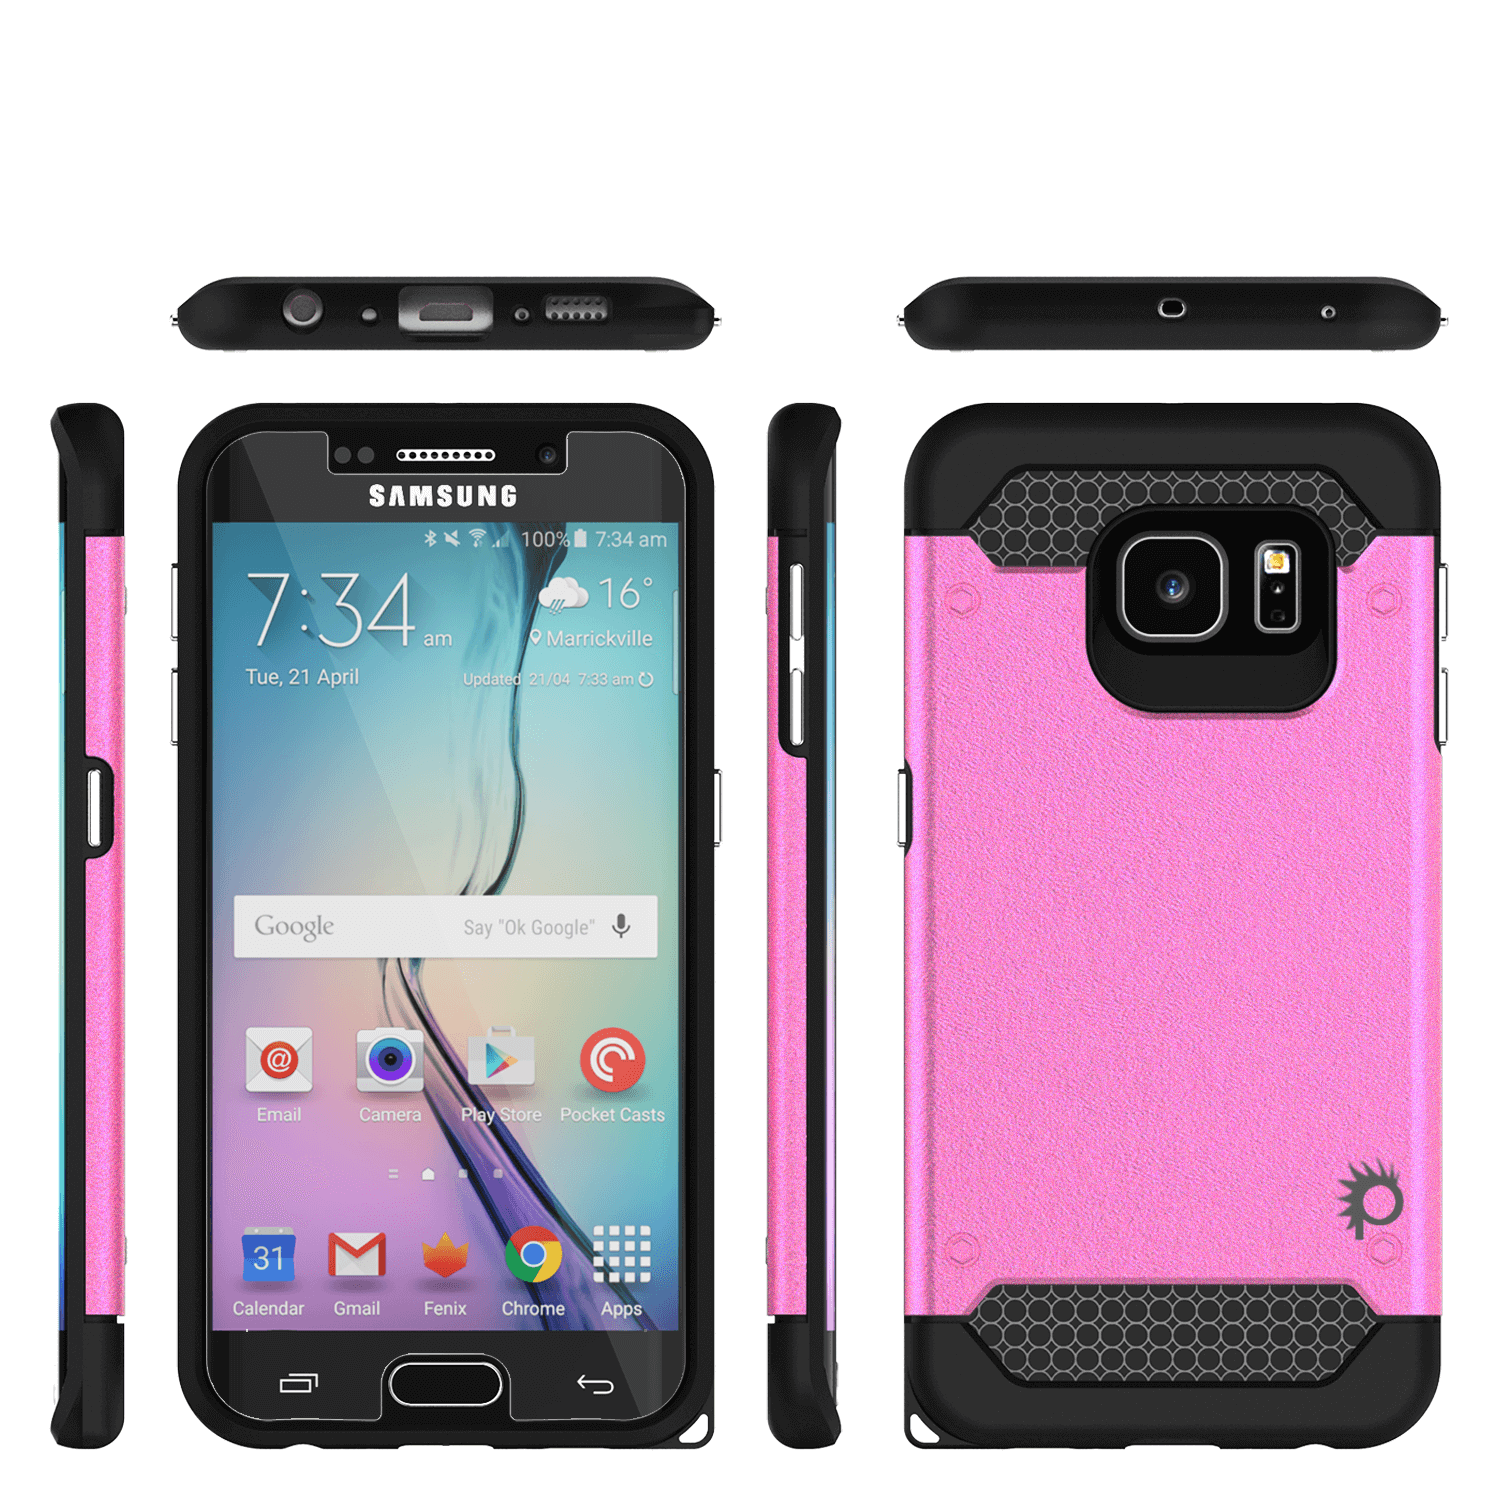 Galaxy s6 EDGE Case PunkCase Galactic Pink Series Slim Armor Soft Cover w/ Screen Protector - PunkCase NZ